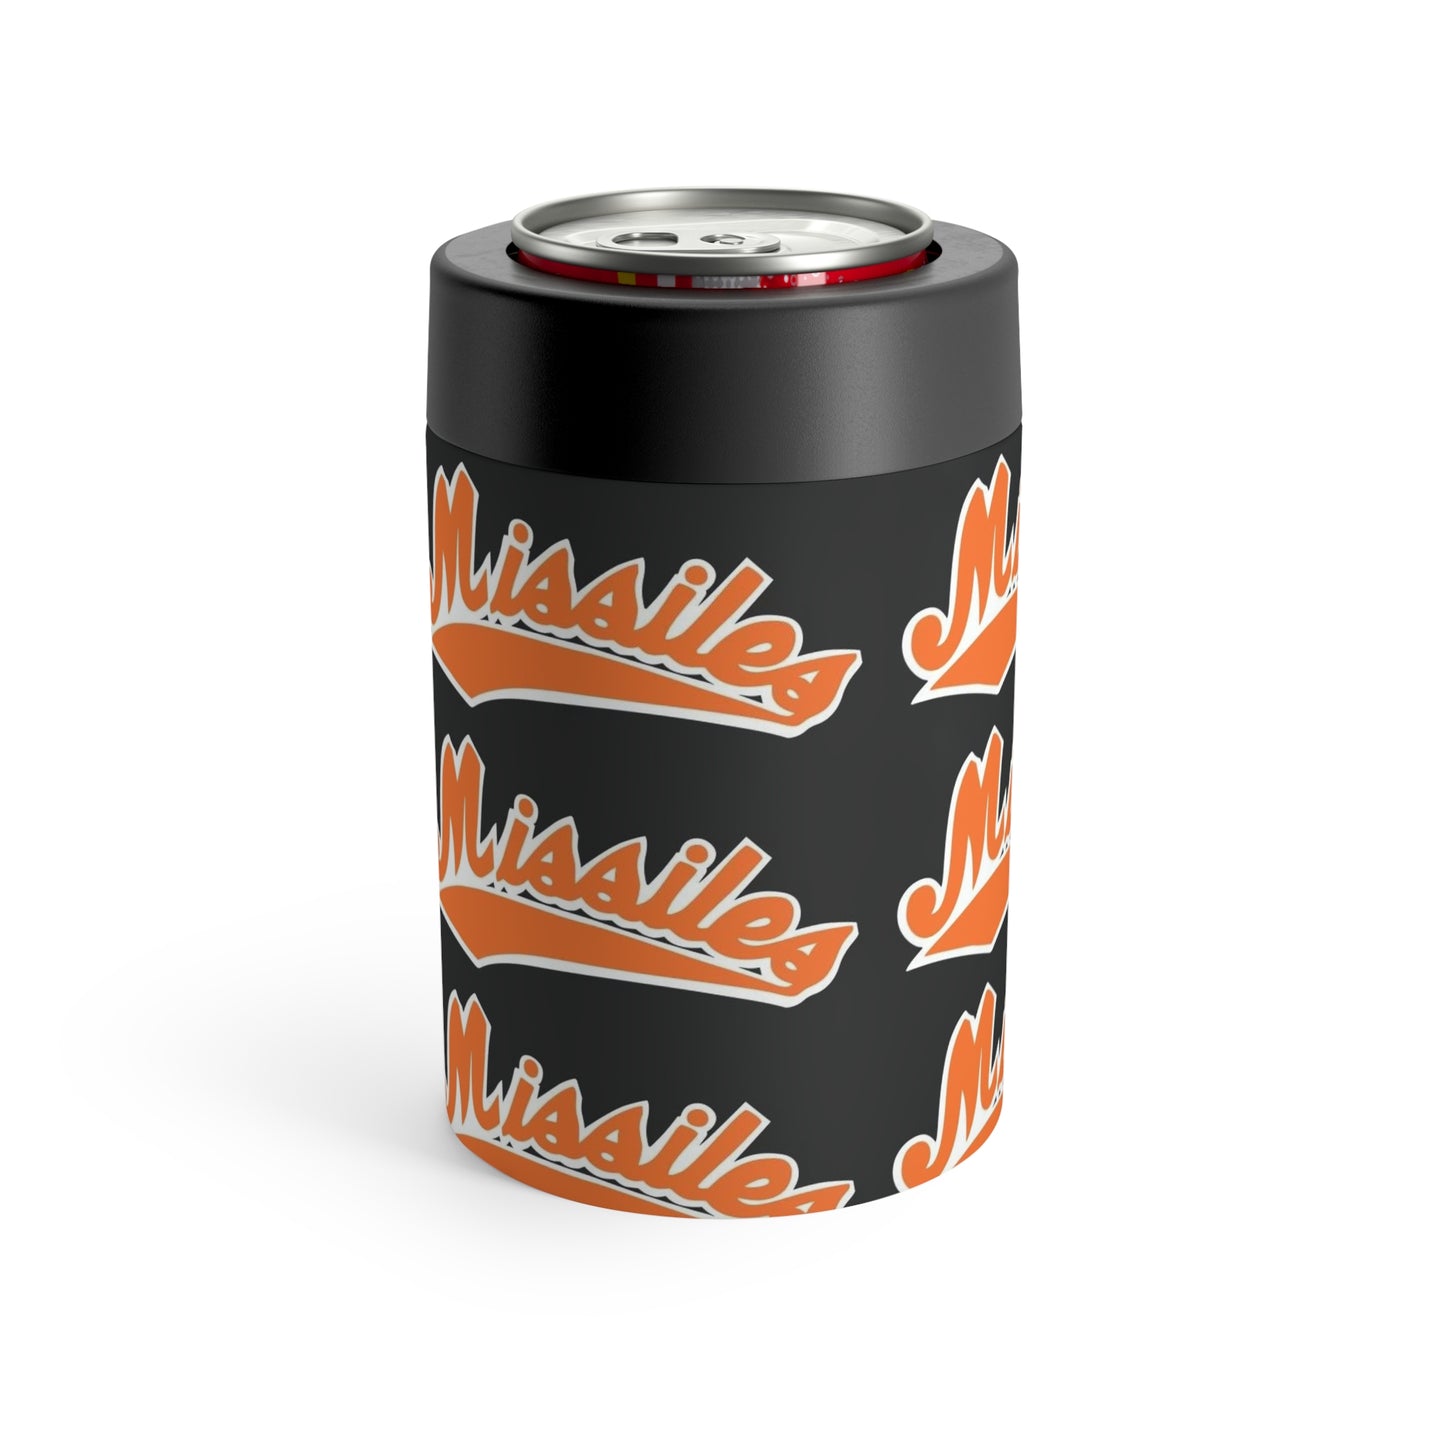 MIssiles Logo Pattern Can Holder